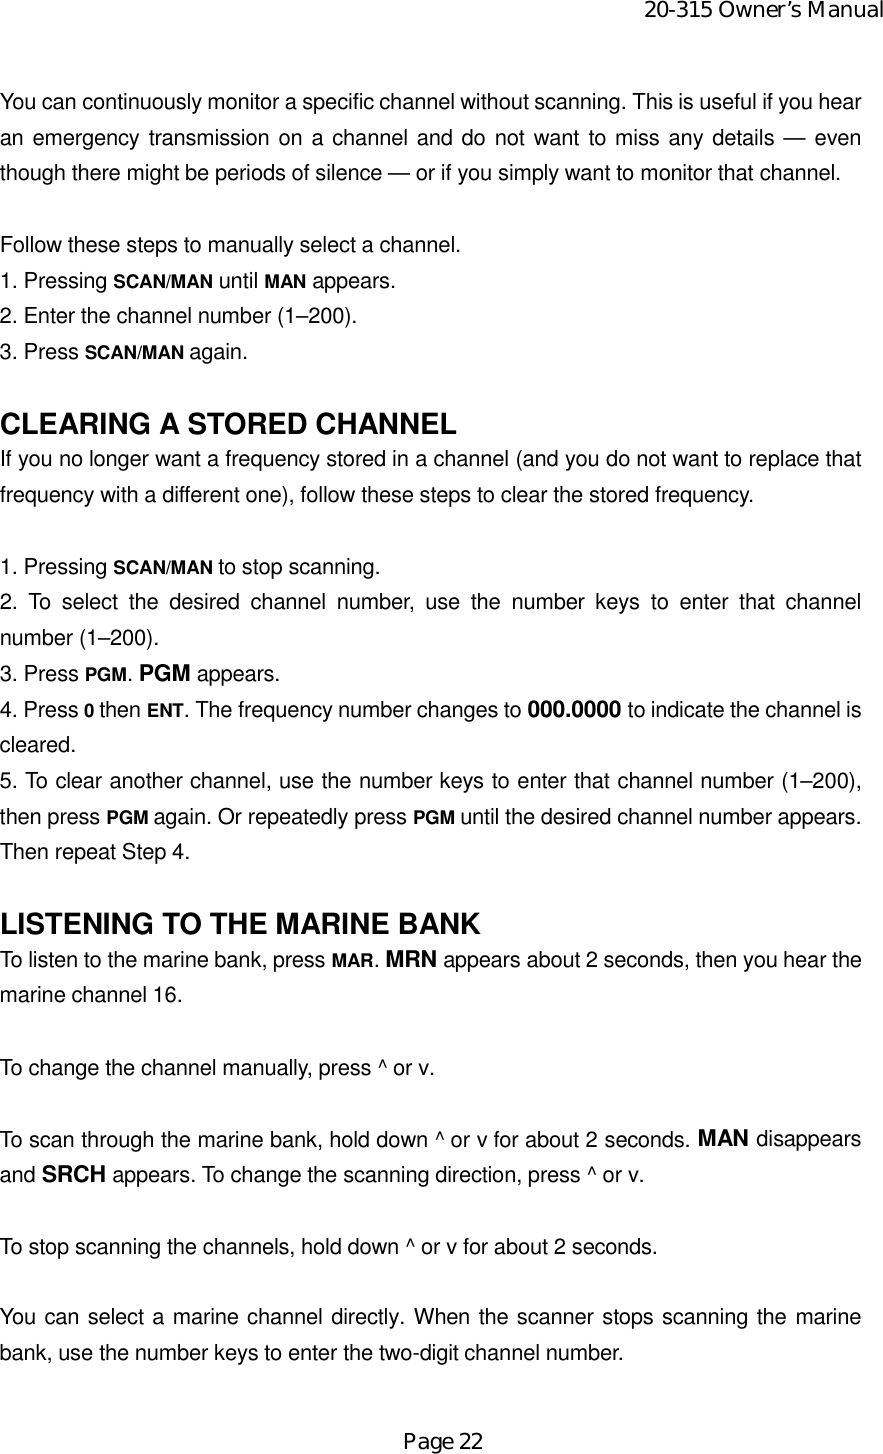 20-315 Owner’s ManualPage 22You can continuously monitor a specific channel without scanning. This is useful if you hearan emergency transmission on a channel and do not want to miss any details — eventhough there might be periods of silence — or if you simply want to monitor that channel.Follow these steps to manually select a channel.1. Pressing SCAN/MAN until MAN appears.2. Enter the channel number (1–200).3. Press SCAN/MAN again.CLEARING A STORED CHANNELIf you no longer want a frequency stored in a channel (and you do not want to replace thatfrequency with a different one), follow these steps to clear the stored frequency.1. Pressing SCAN/MAN to stop scanning.2. To select the desired channel number, use the number keys to enter that channelnumber (1–200).3. Press PGM. PGM appears.4. Press 0 then ENT. The frequency number changes to 000.0000 to indicate the channel iscleared.5. To clear another channel, use the number keys to enter that channel number (1–200),then press PGM again. Or repeatedly press PGM until the desired channel number appears.Then repeat Step 4.LISTENING TO THE MARINE BANKTo listen to the marine bank, press MAR. MRN appears about 2 seconds, then you hear themarine channel 16.To change the channel manually, press ^ or v.To scan through the marine bank, hold down ^ or v for about 2 seconds. MAN disappearsand SRCH appears. To change the scanning direction, press ^ or v.To stop scanning the channels, hold down ^ or v for about 2 seconds.You can select a marine channel directly. When the scanner stops scanning the marinebank, use the number keys to enter the two-digit channel number.